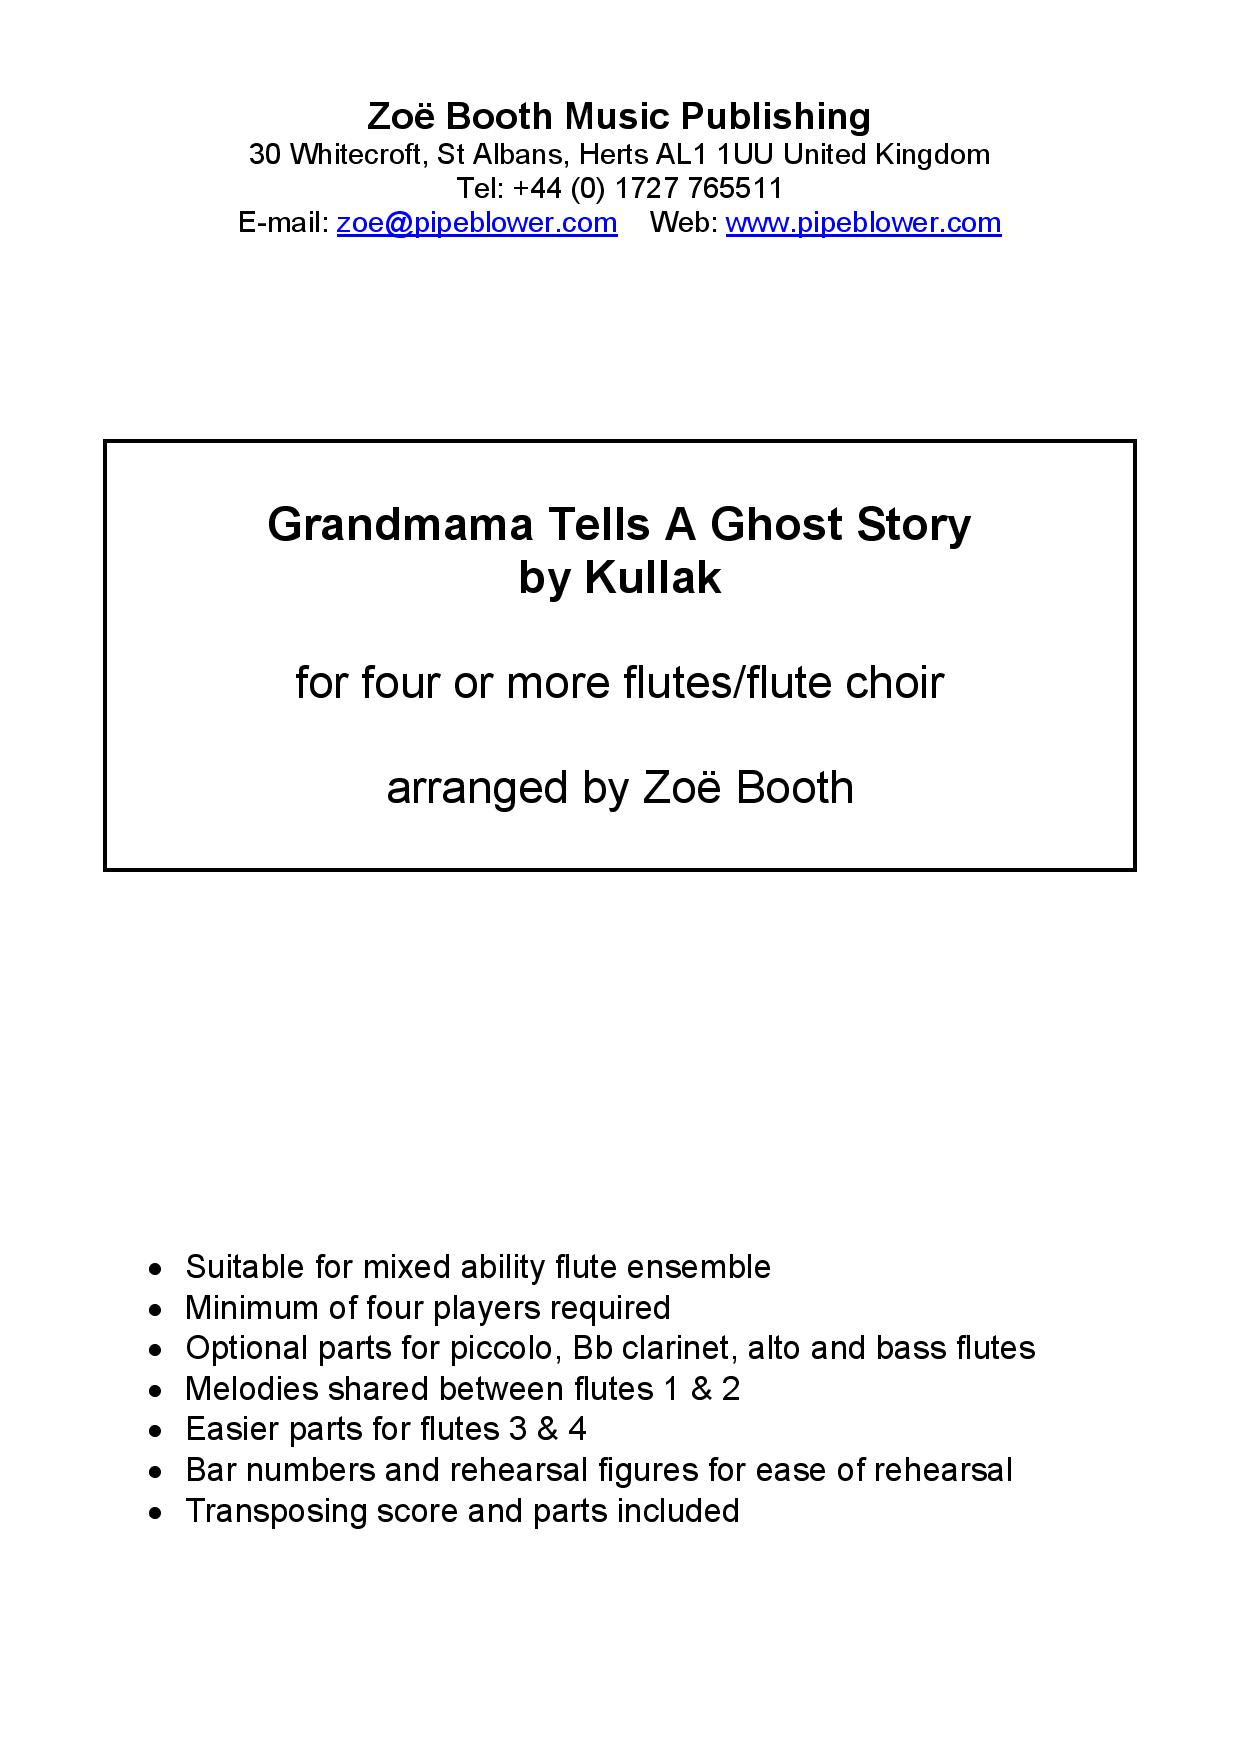 Grandmama Tells A Ghost Story by Kullak,  arranged by Zoë Booth for four or more flutes/flute choir